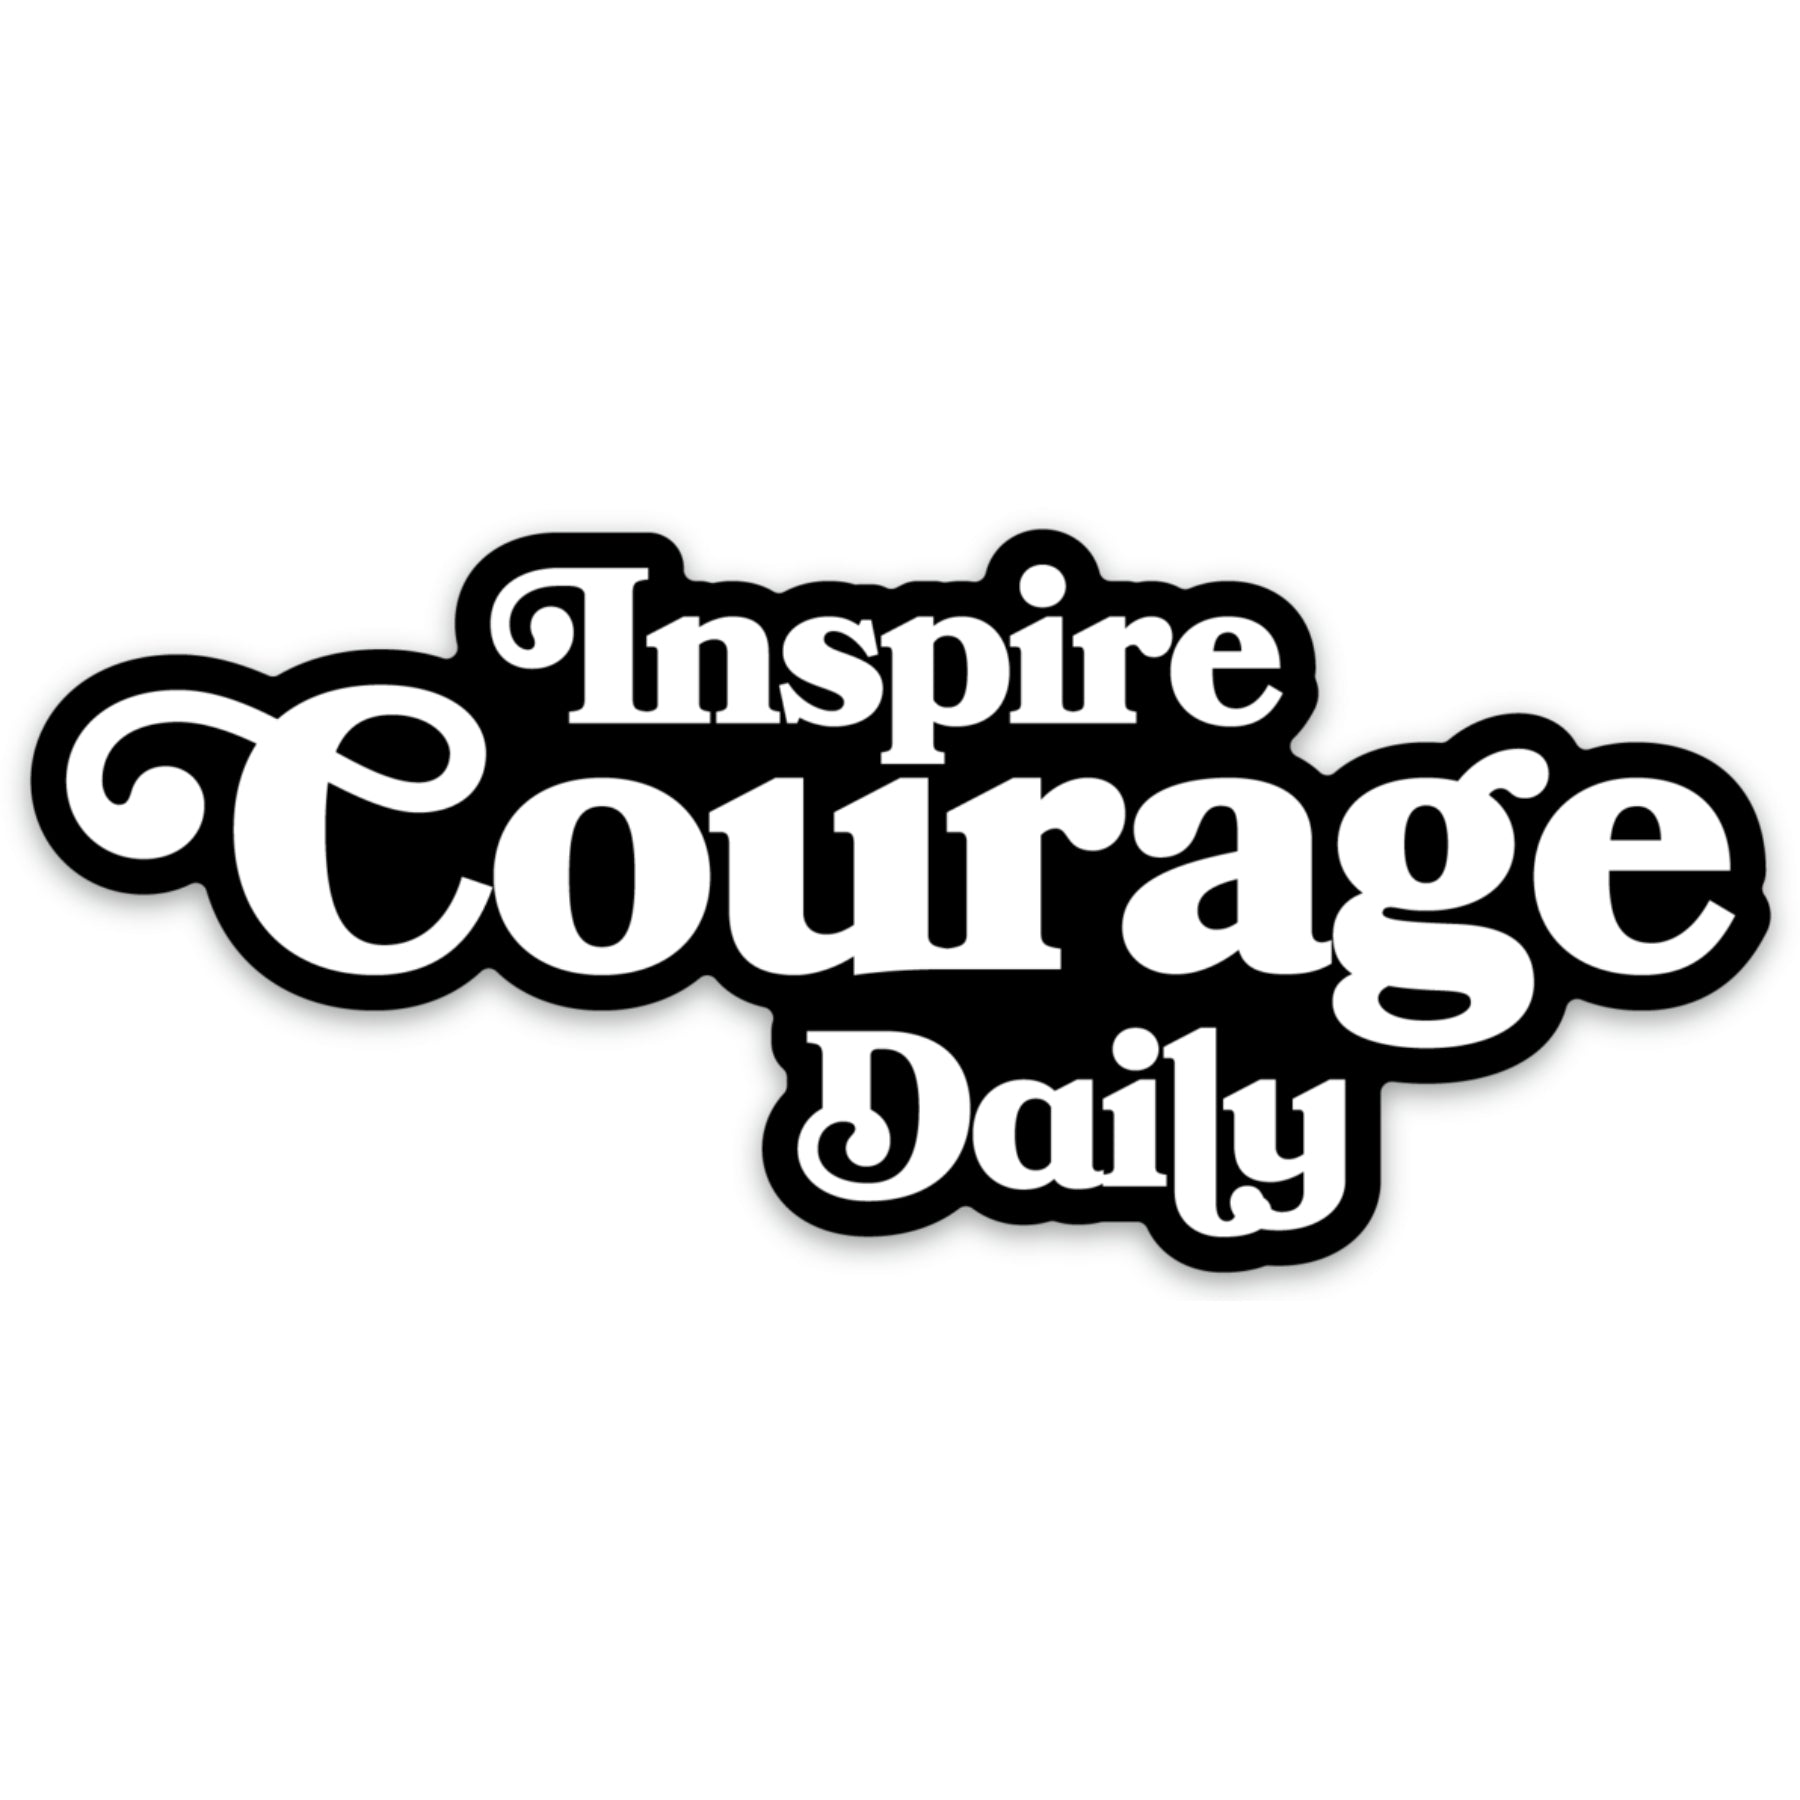 Inspire Courage Daily (sticker)